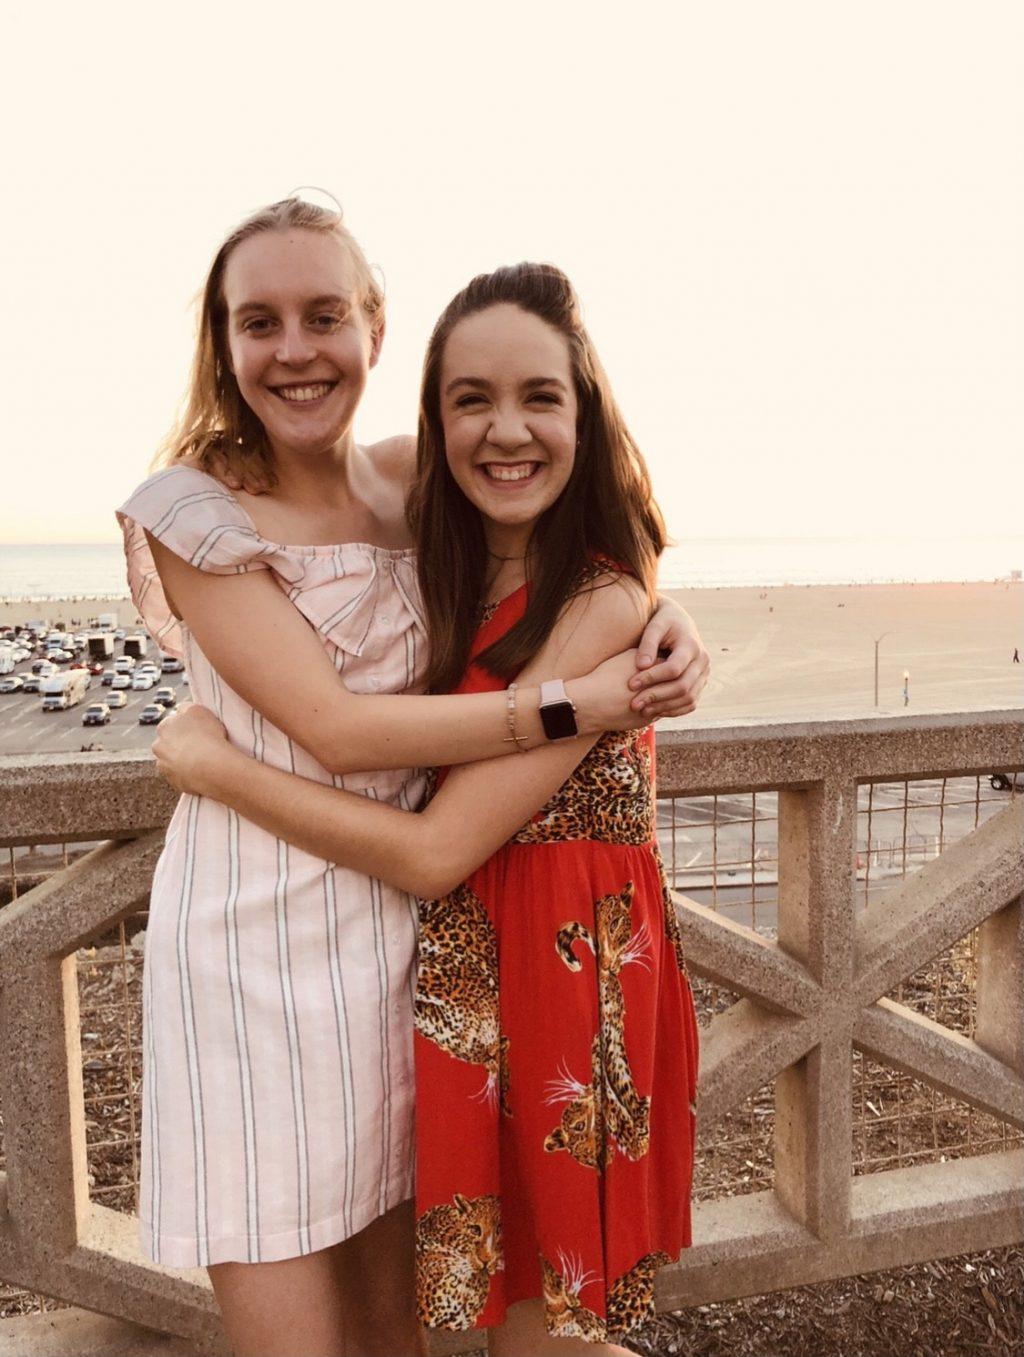 Vander Mey (left) smiles happily with her best friend, senior Rachel Miner (right), in Santa Monica in October 2018. Vander Mey said they became good friends during sophomore year since they both didn’t go abroad.